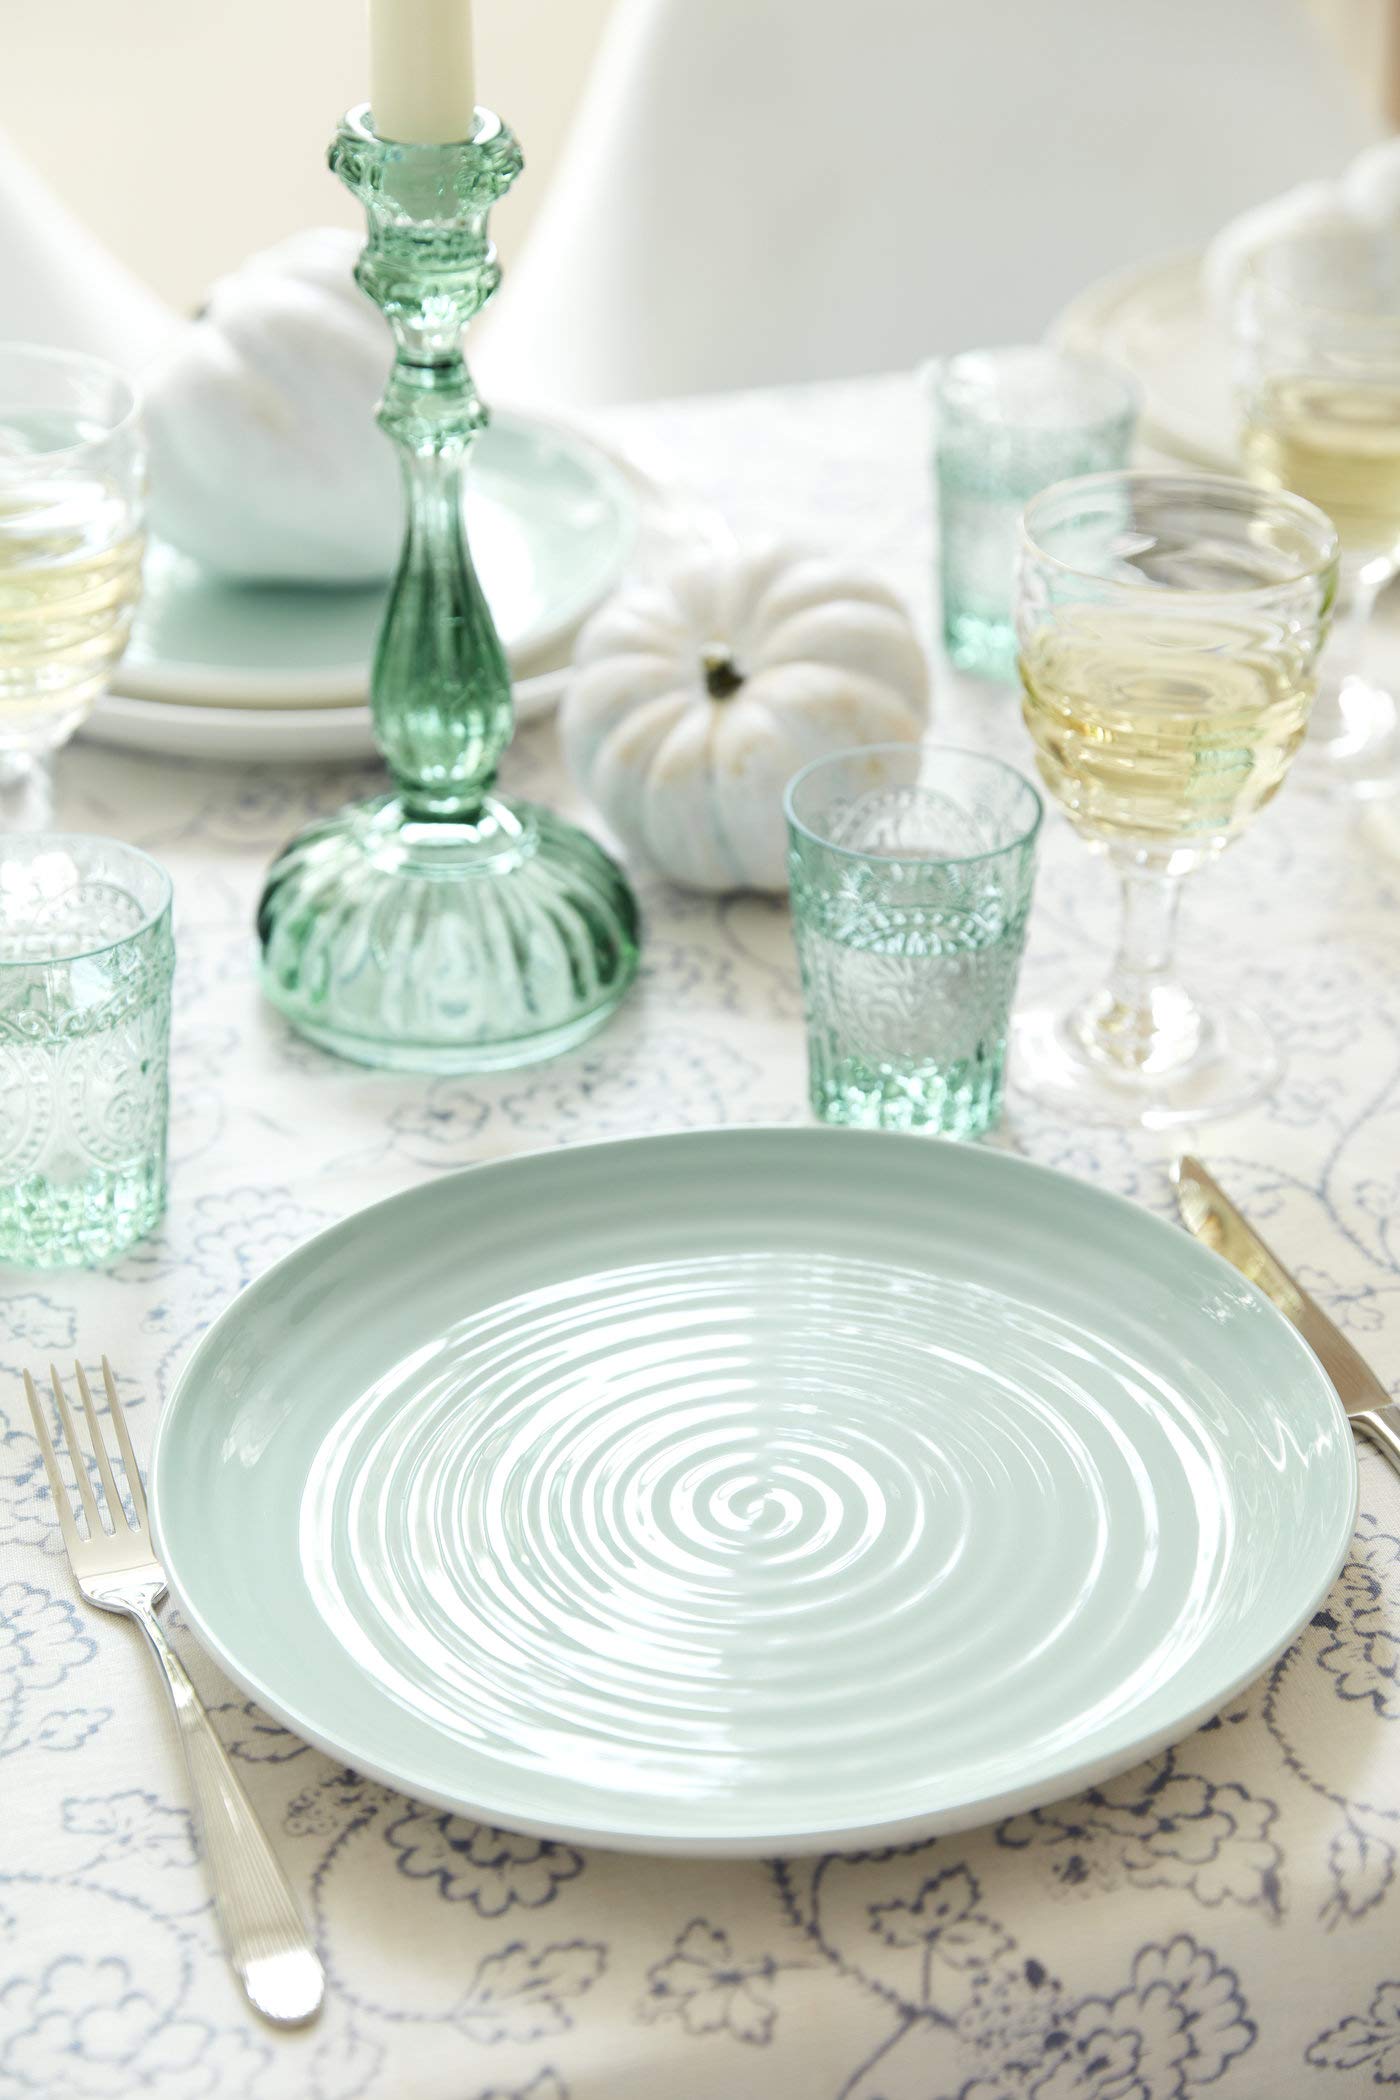 Portmeirion Sophie Conran White Round Platter | 12 Inch Porcelain Serving Tray for Appetizers, Snacks, and Sandwiches | Made from Fine Porcelain | Dishwasher and Microwave Safe